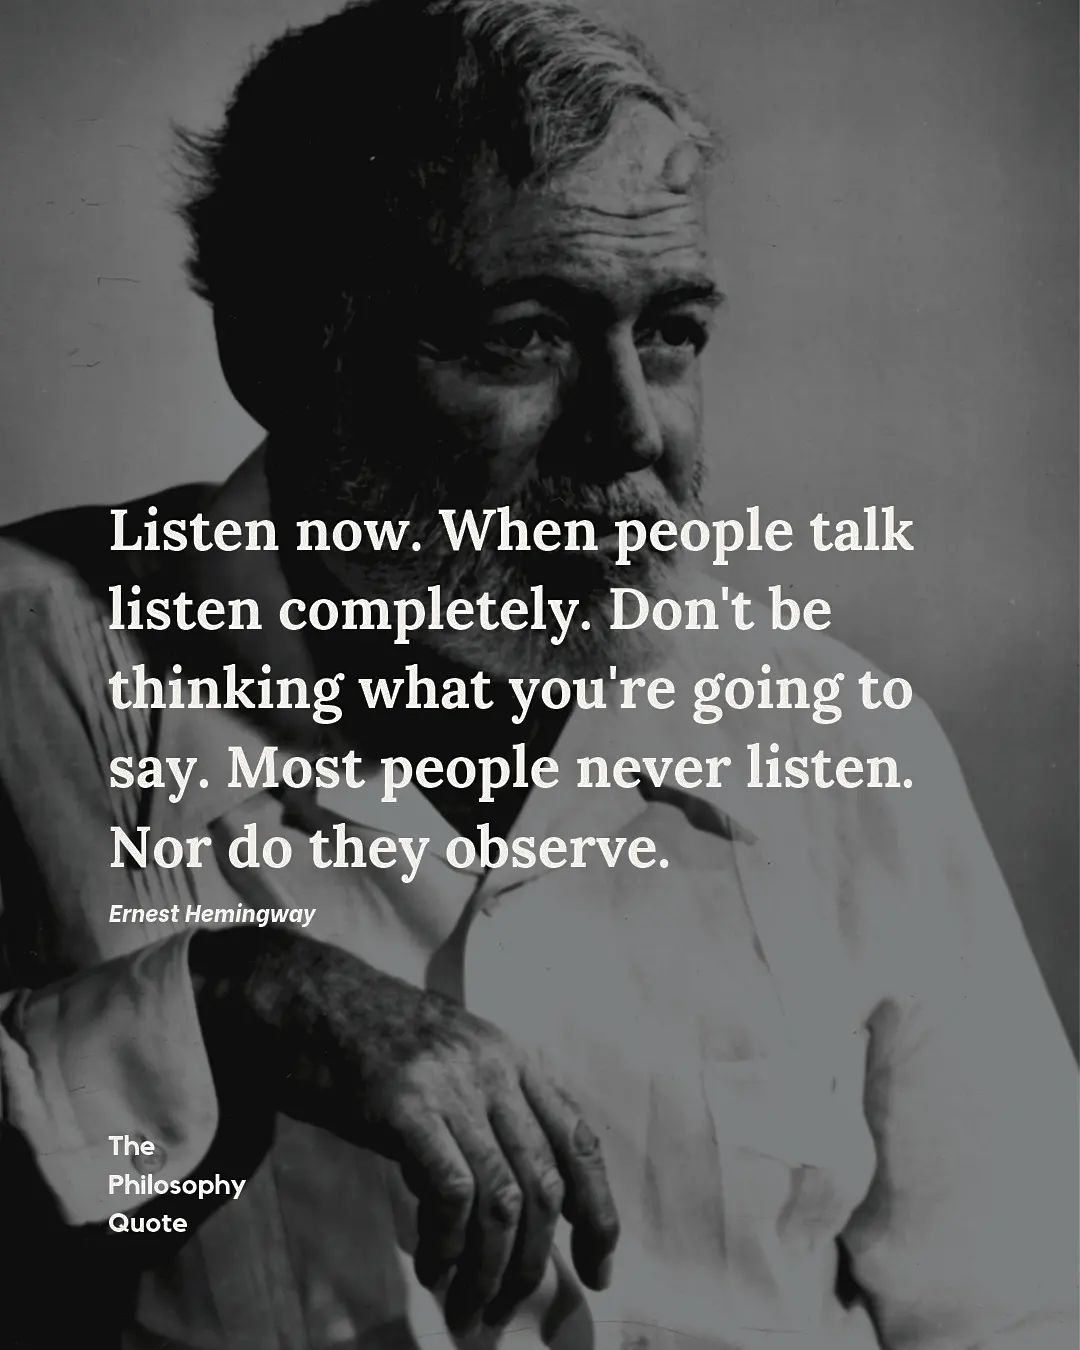 When people talk listen completely. Don’t be thinking what you’re going to say. Most people never listen. Nor do they observe.